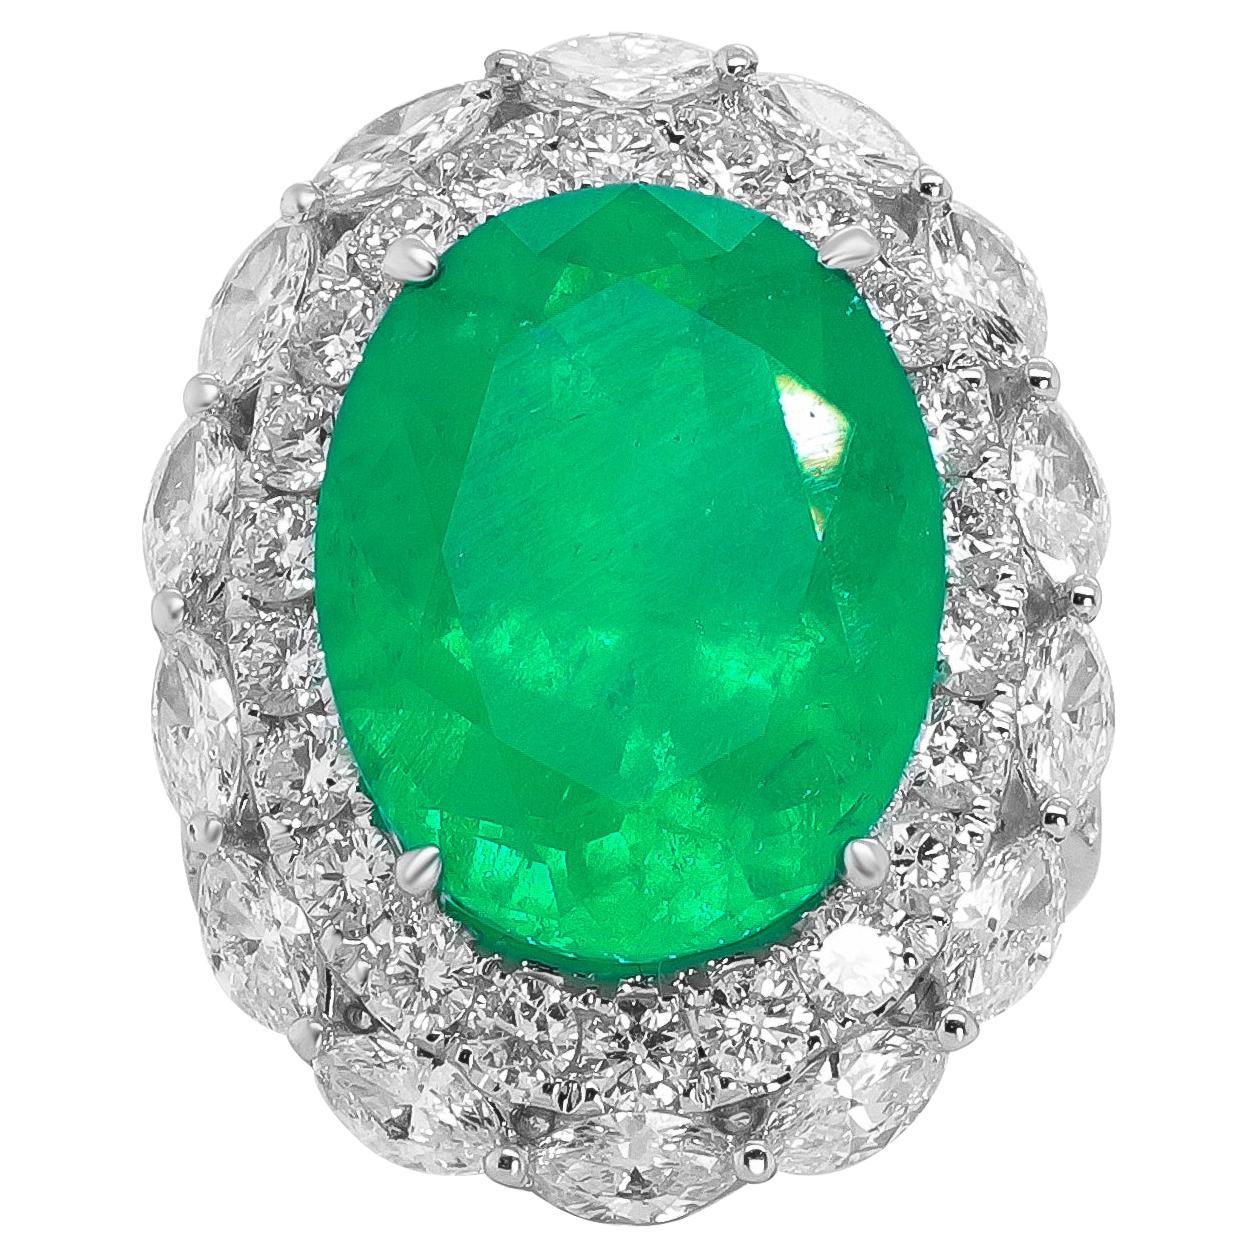 Classic Oval-Cut Emerald with Marquise & Round White Diamond 18k White Gold Ring